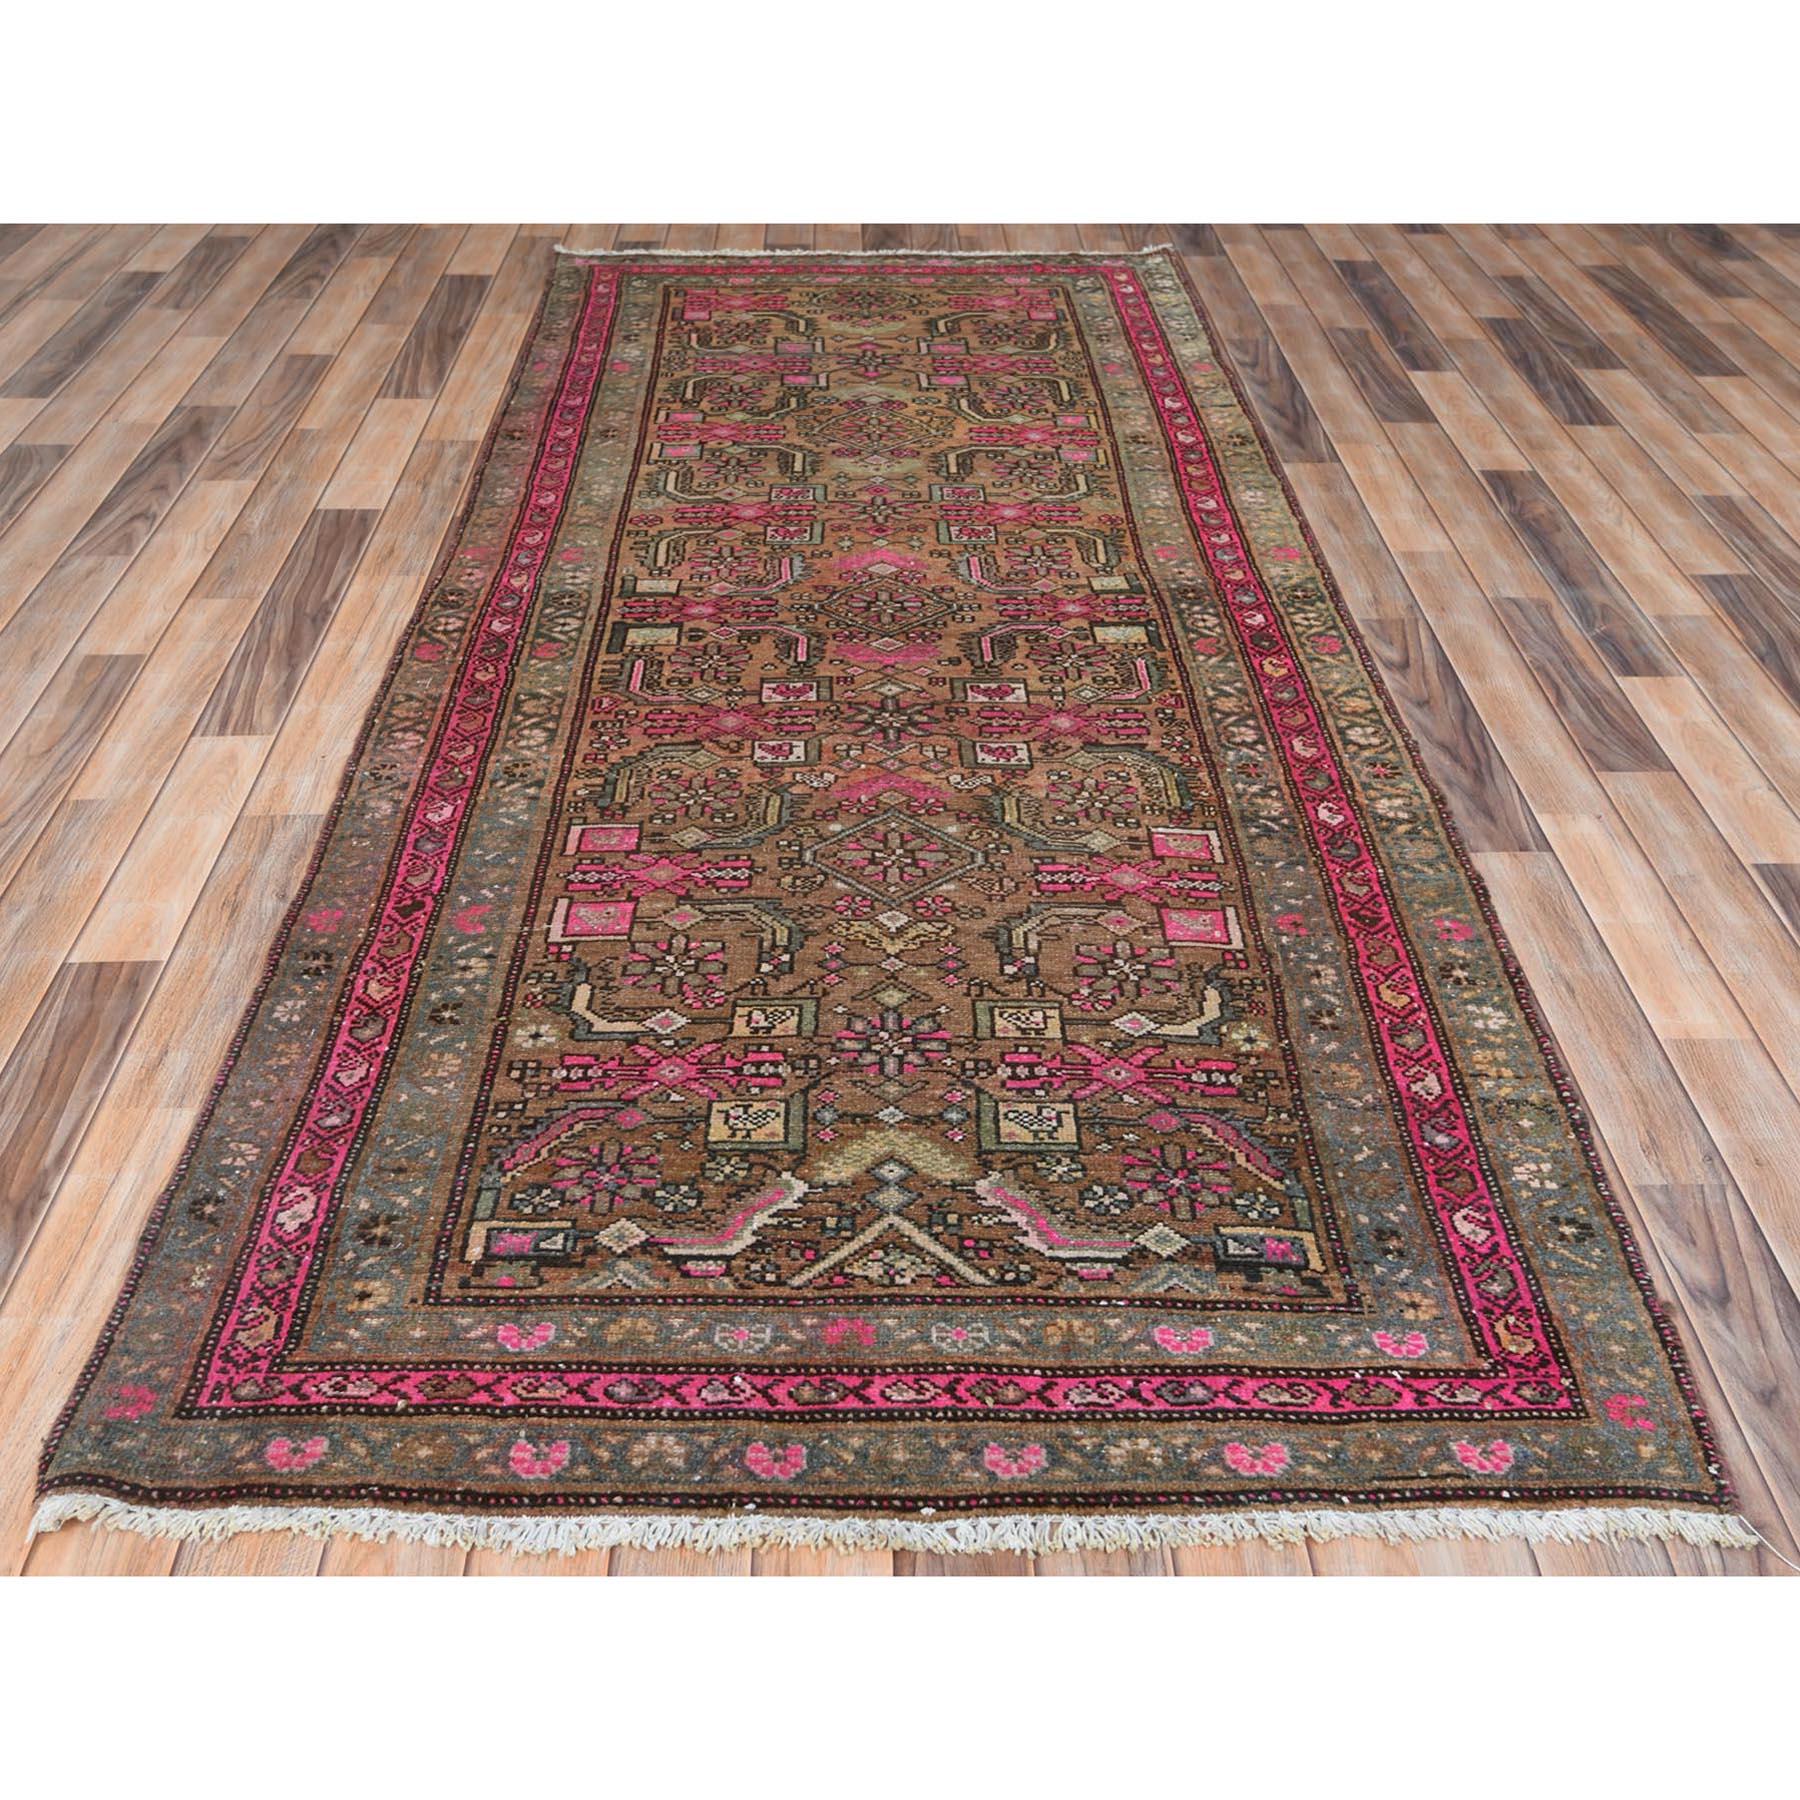 This fabulous hand-knotted carpet has been created and designed for extra strength and durability. This rug has been handcrafted for weeks in the traditional method that is used to make
Exact Rug Size in Feet and Inches : 4'0